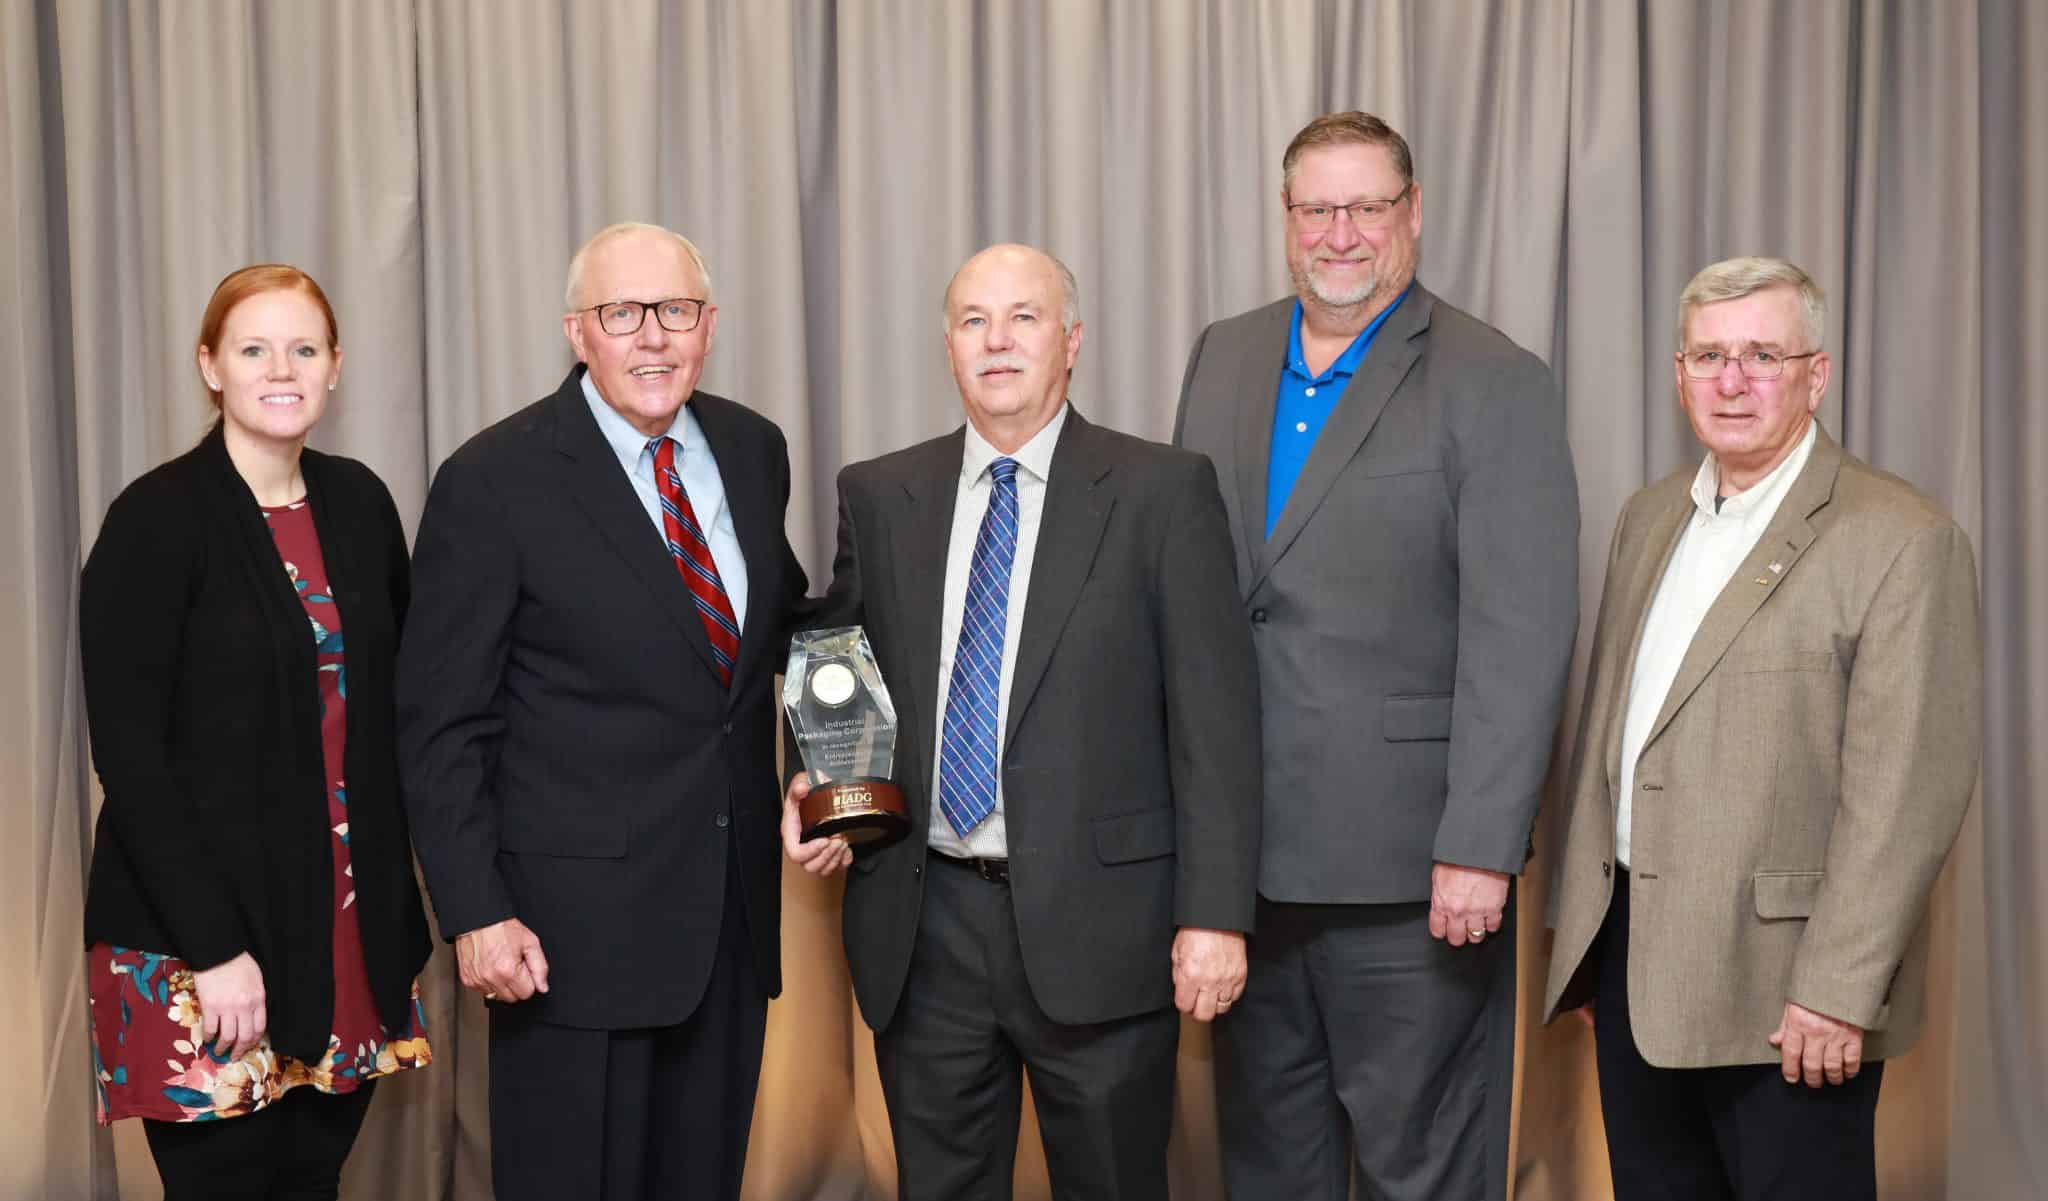 Tomahawk-based Industrial Packaging Corporation honored with Iowa Venture Award